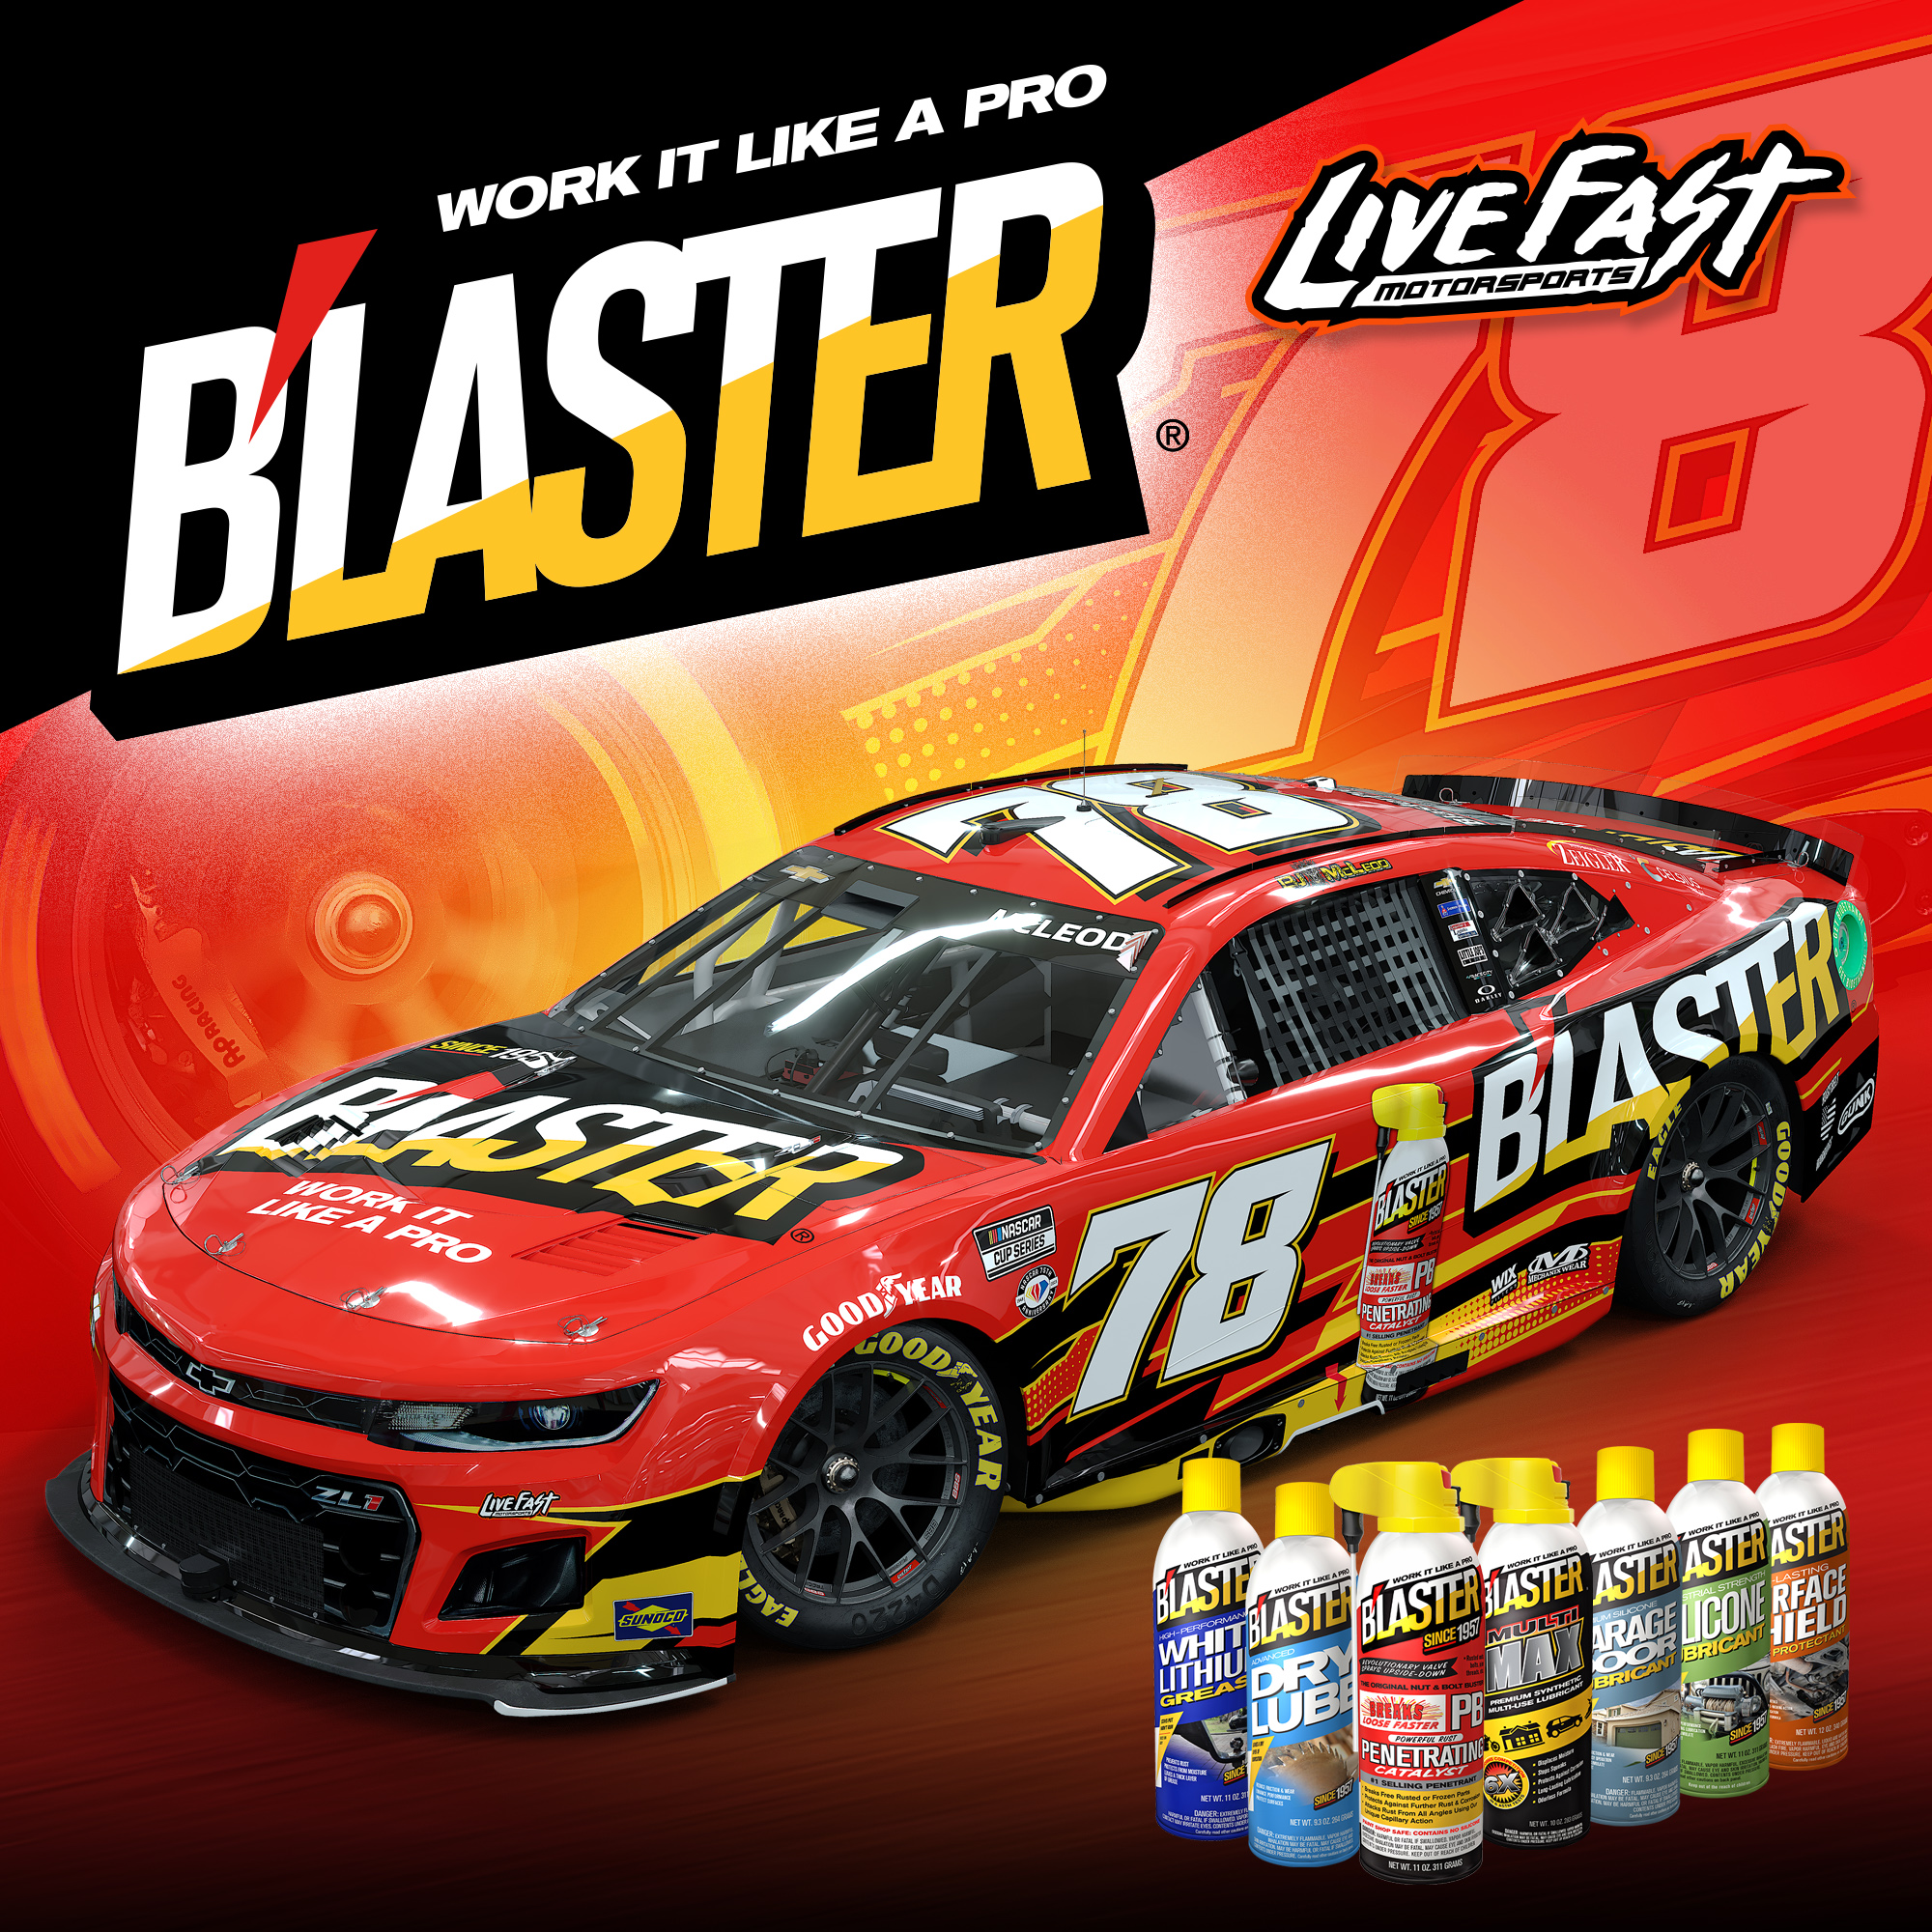 Blaster Expands to Nine Race Primary Partnership with Live Fast Motorsports